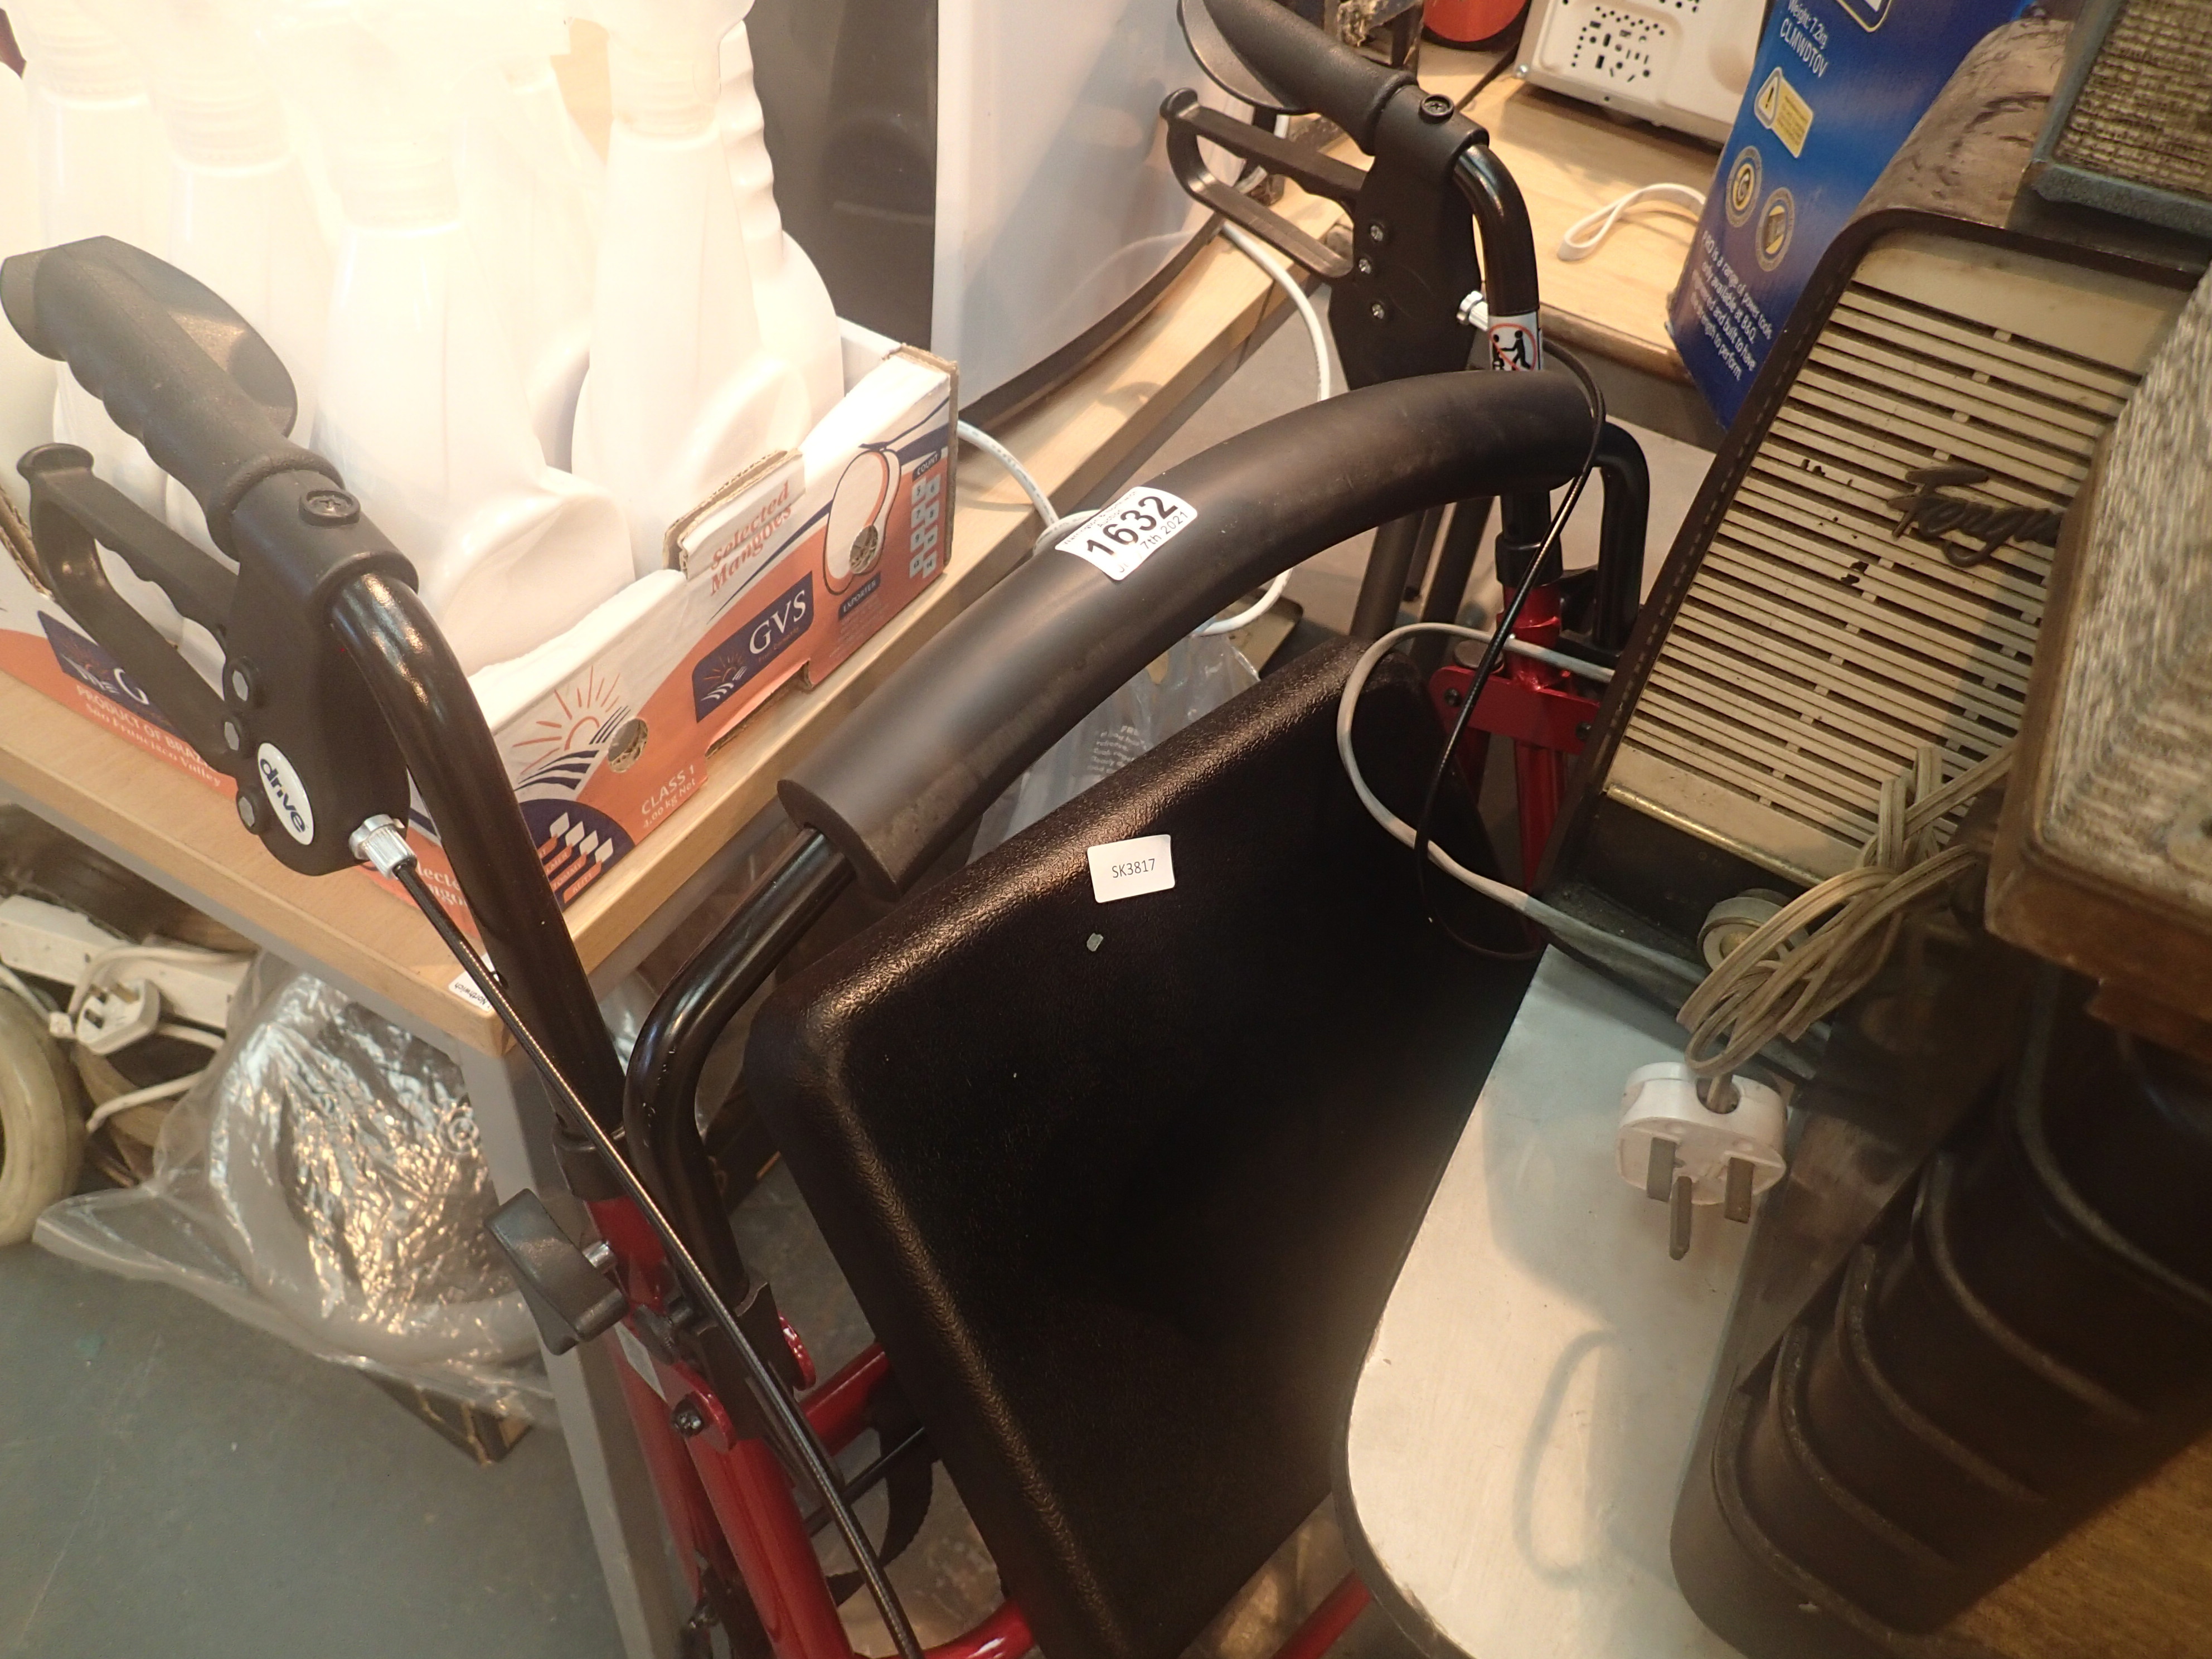 Drive mobility walker with seat and bag. Not available for in-house P&P, contact Paul O'Hea at